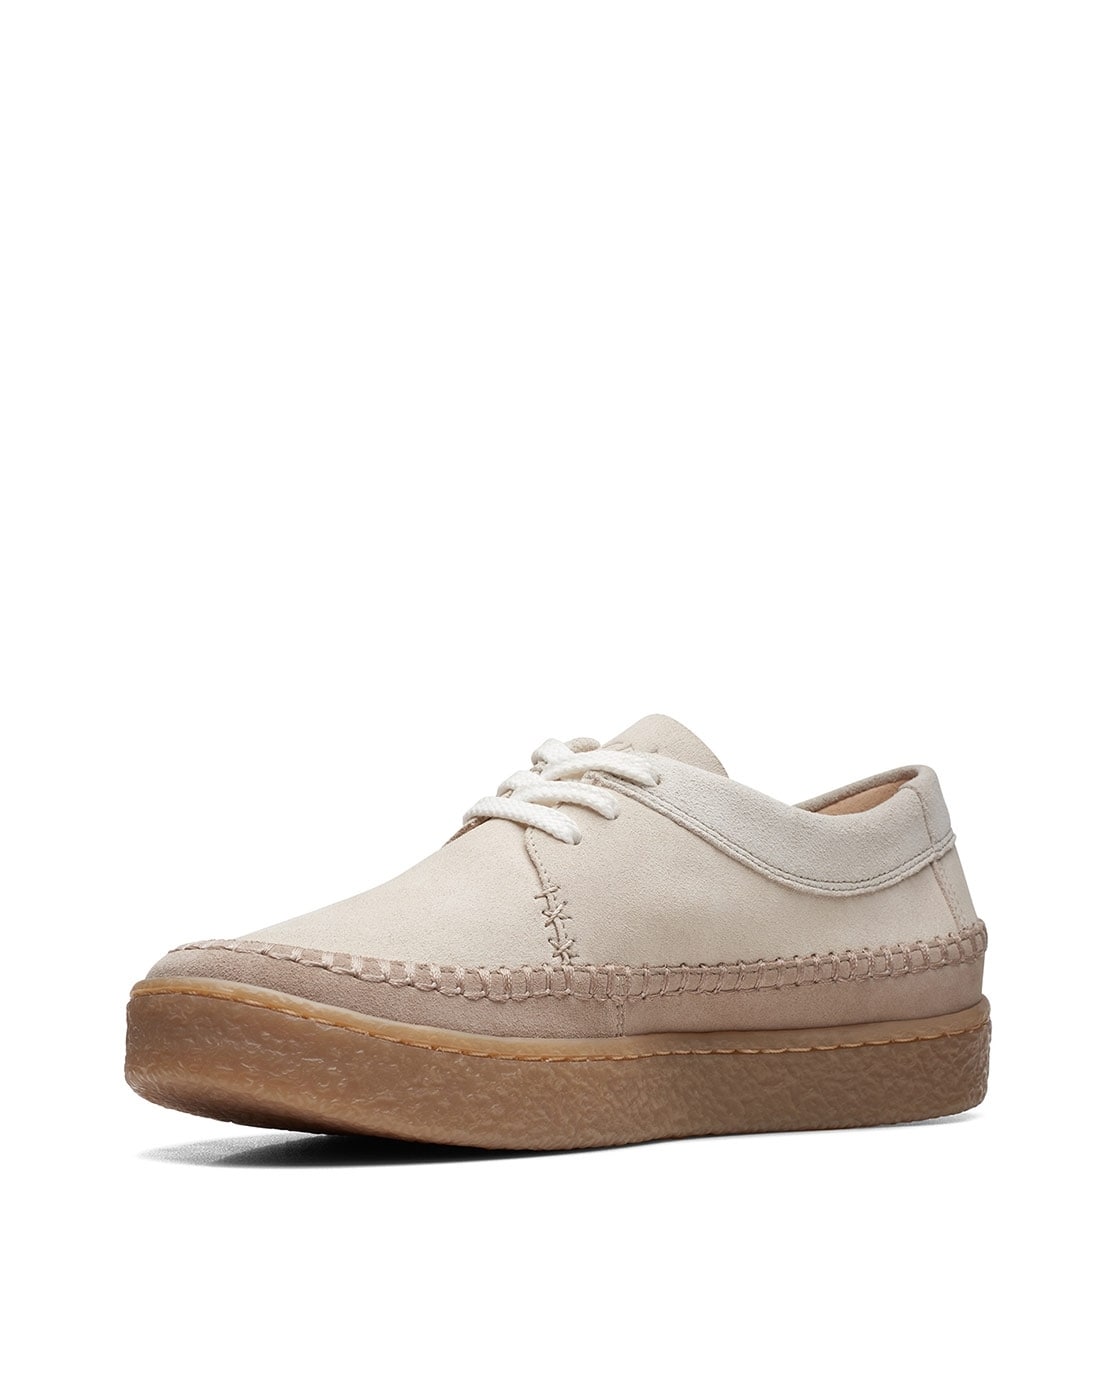 White court lace sneaker - CLARKS ENGLAND - Pk by Paskal